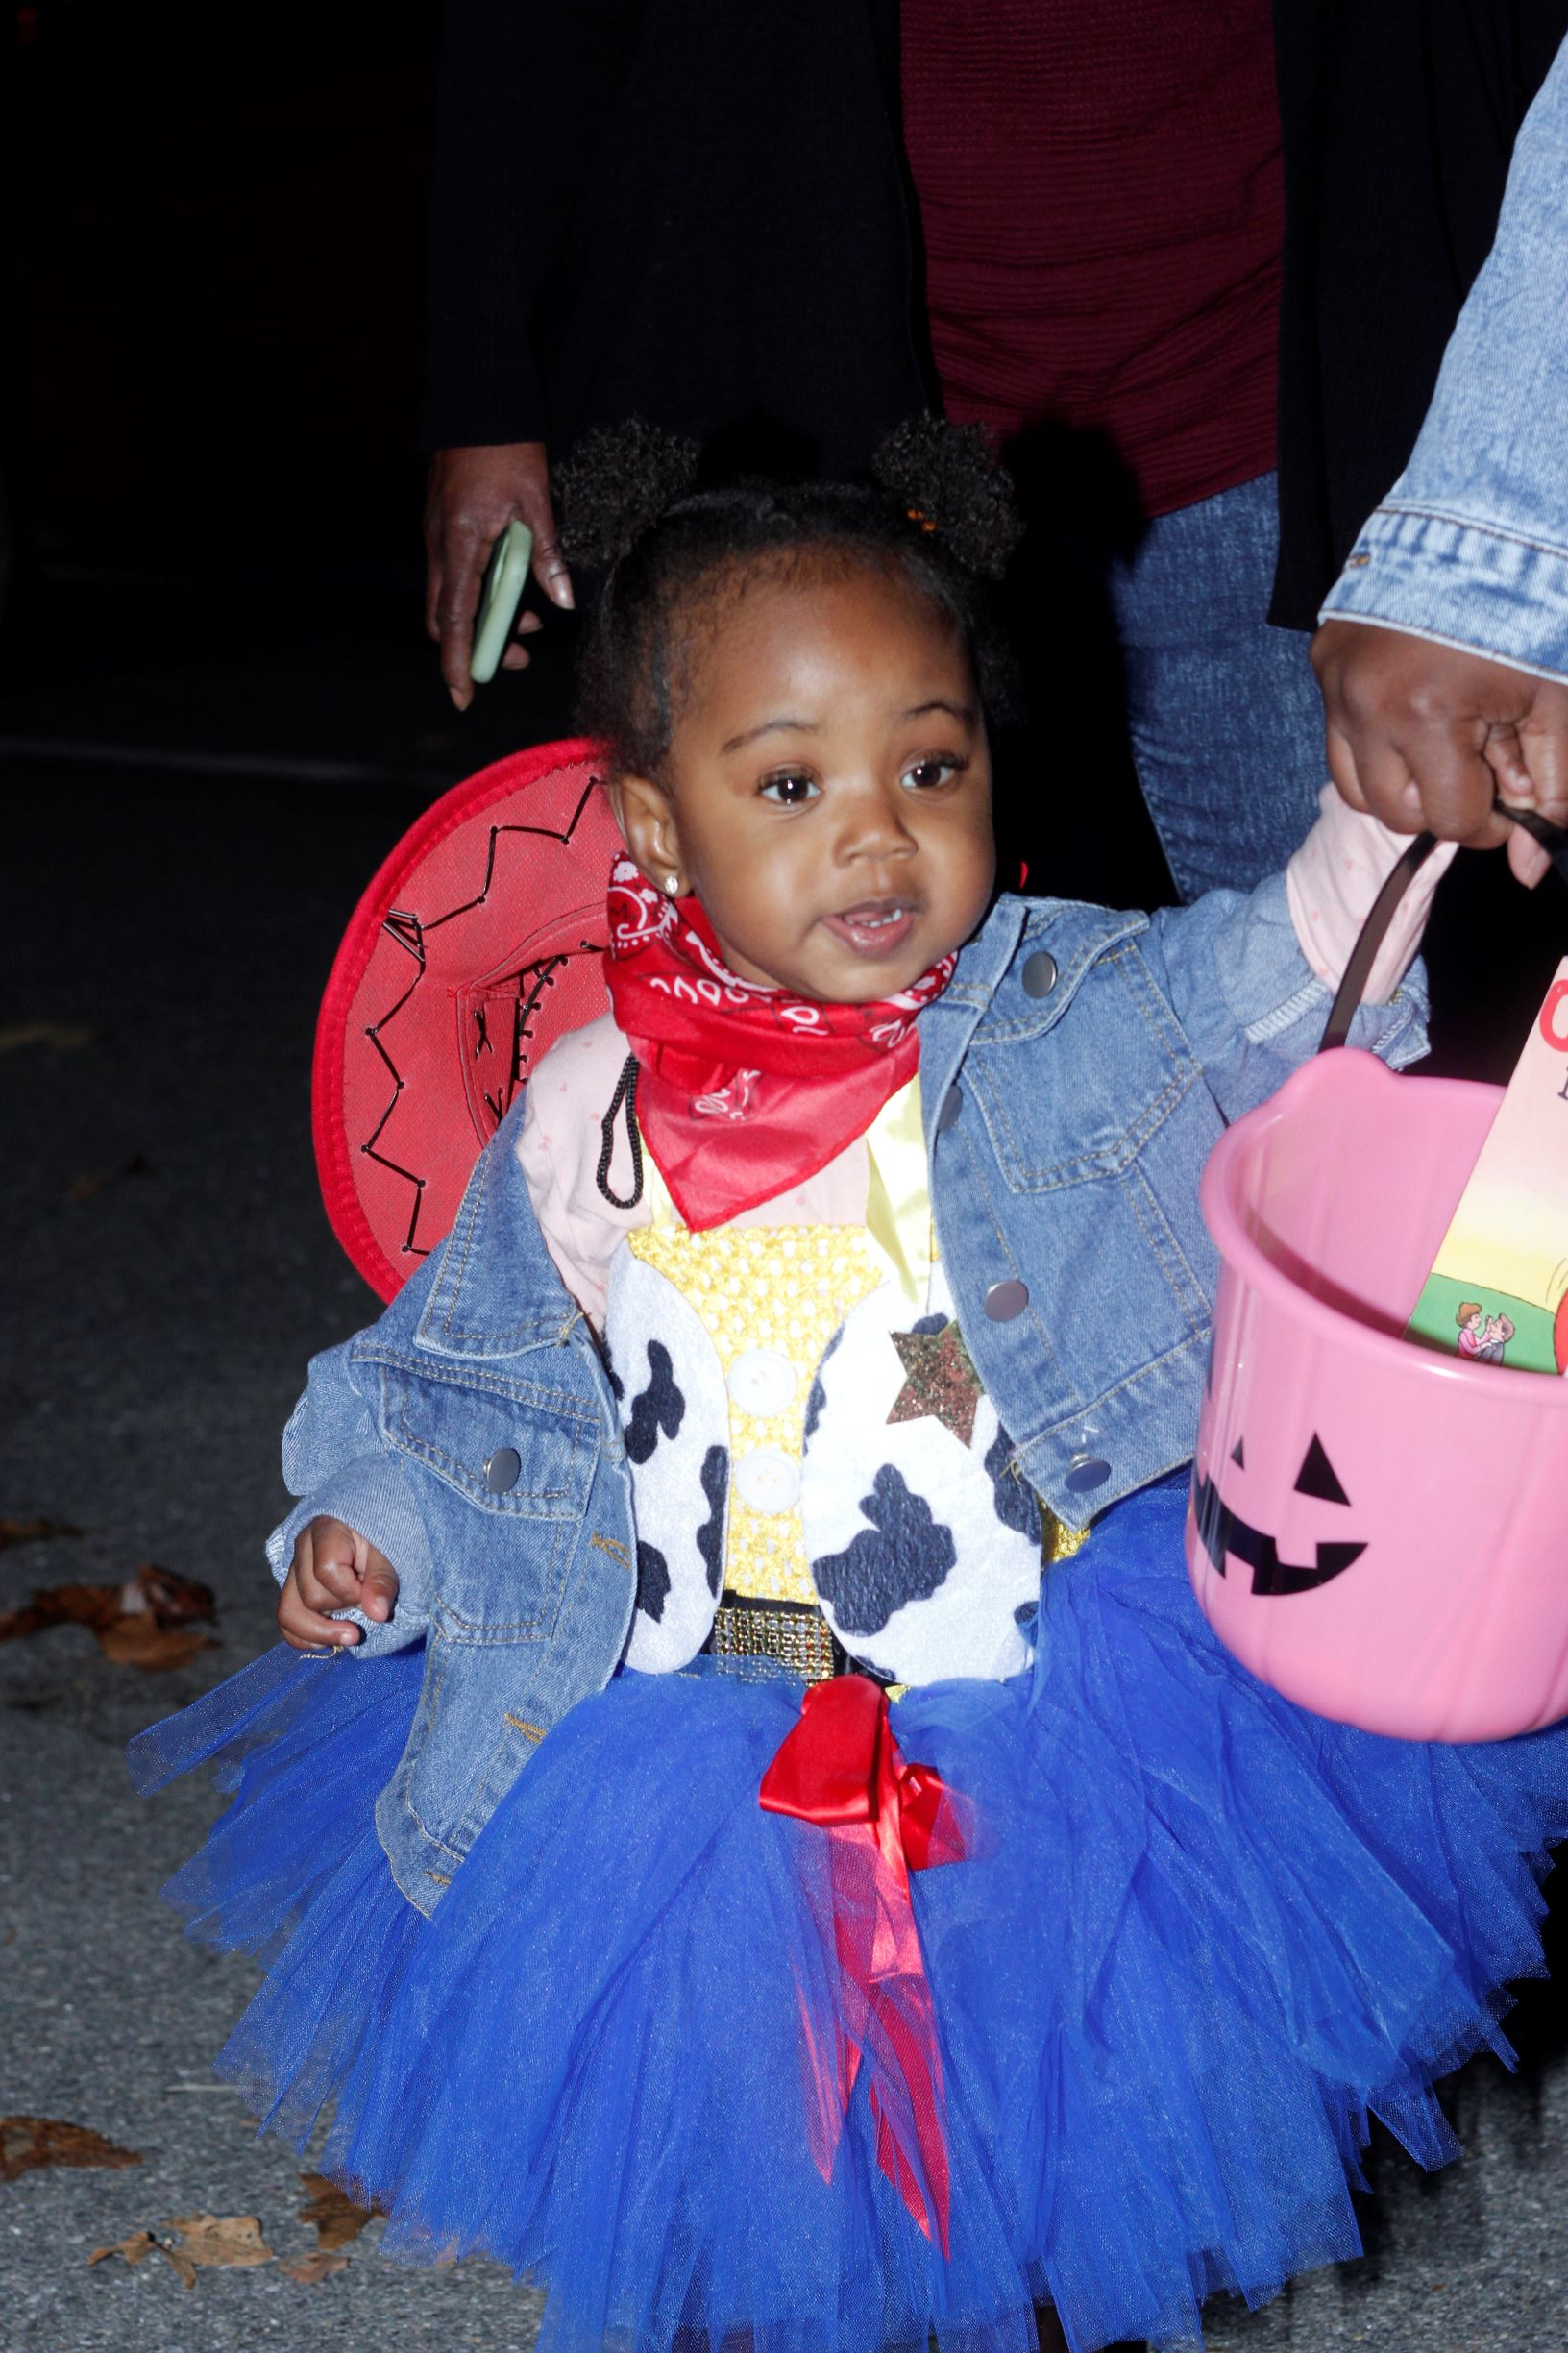 Pikeville Celebrates With Haunts and Harvests (PHOTO GALLERY)